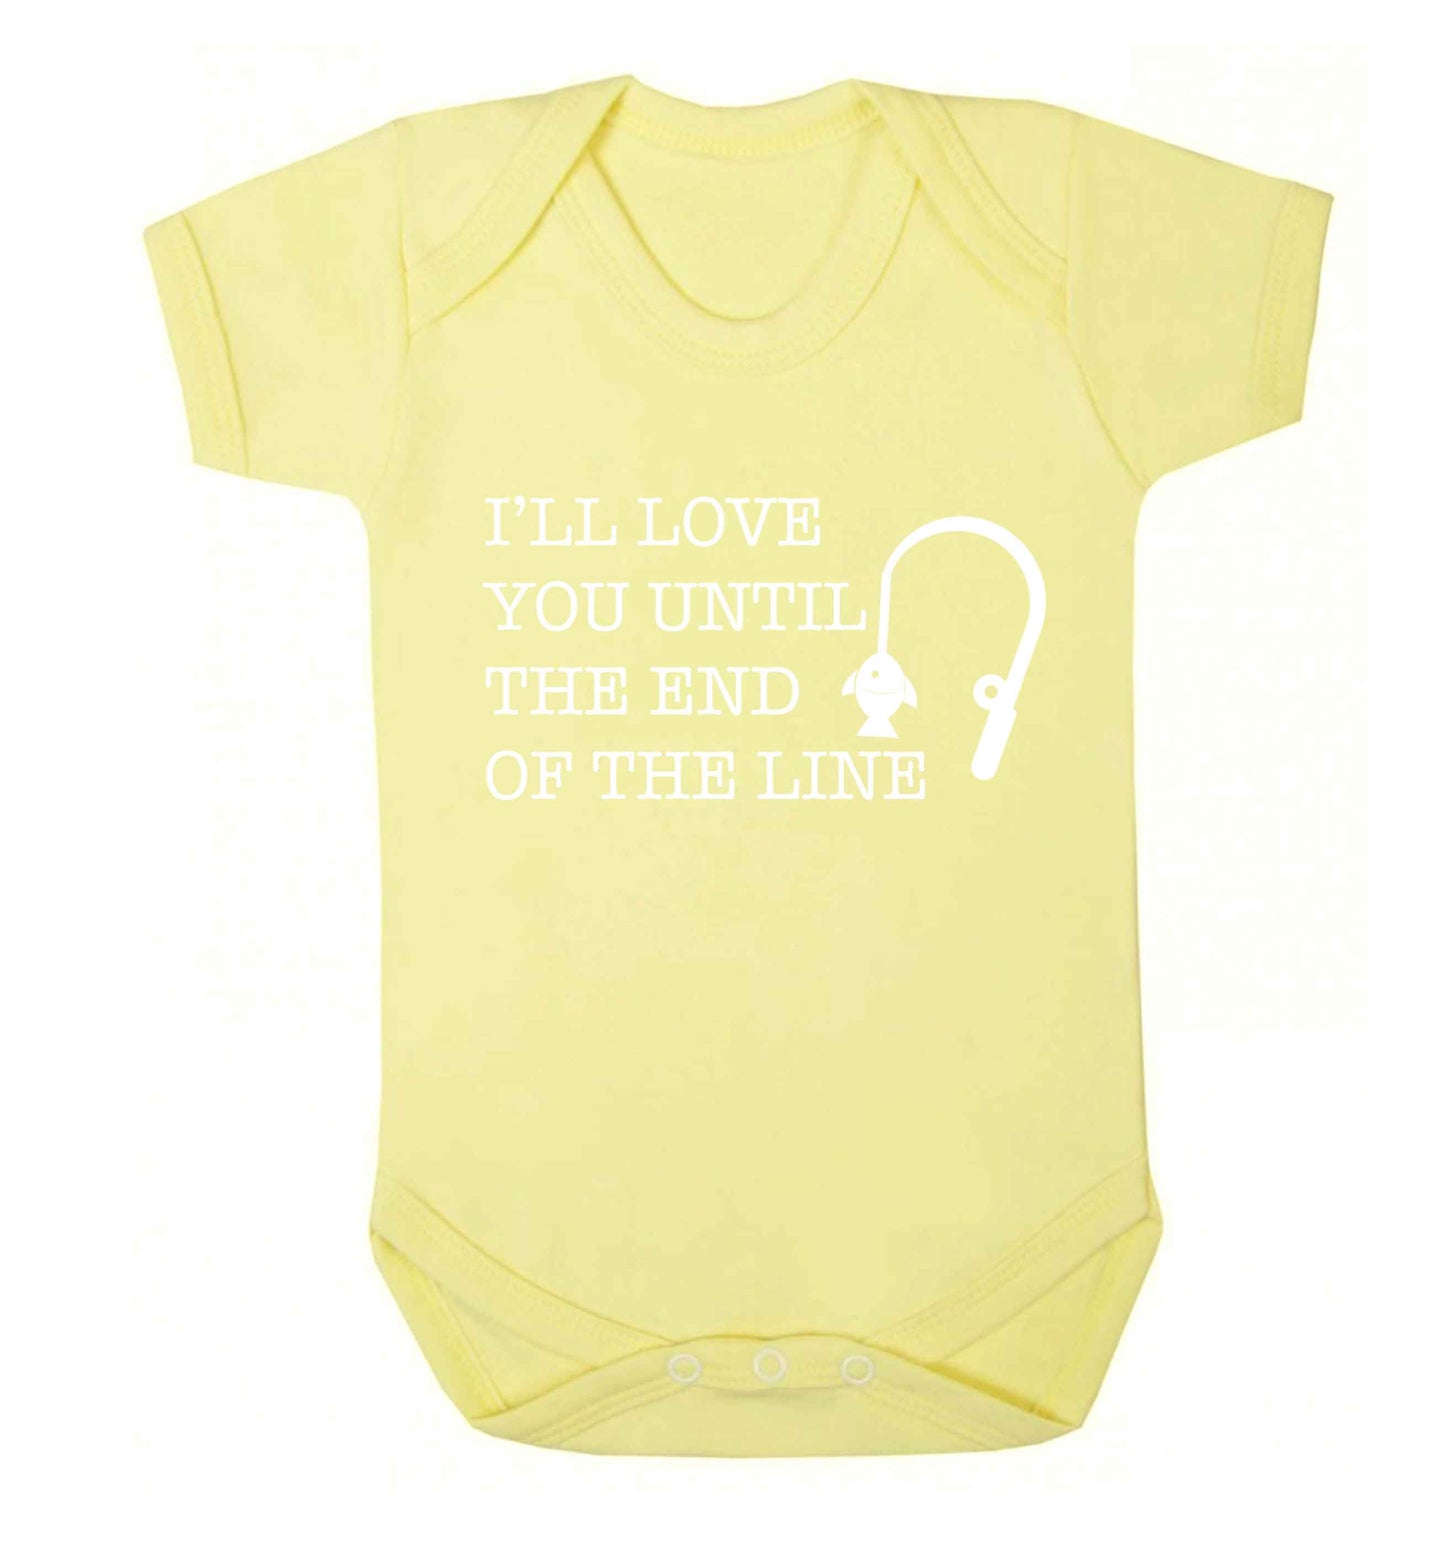 I'll love you until the end of the line Baby Vest pale yellow 18-24 months